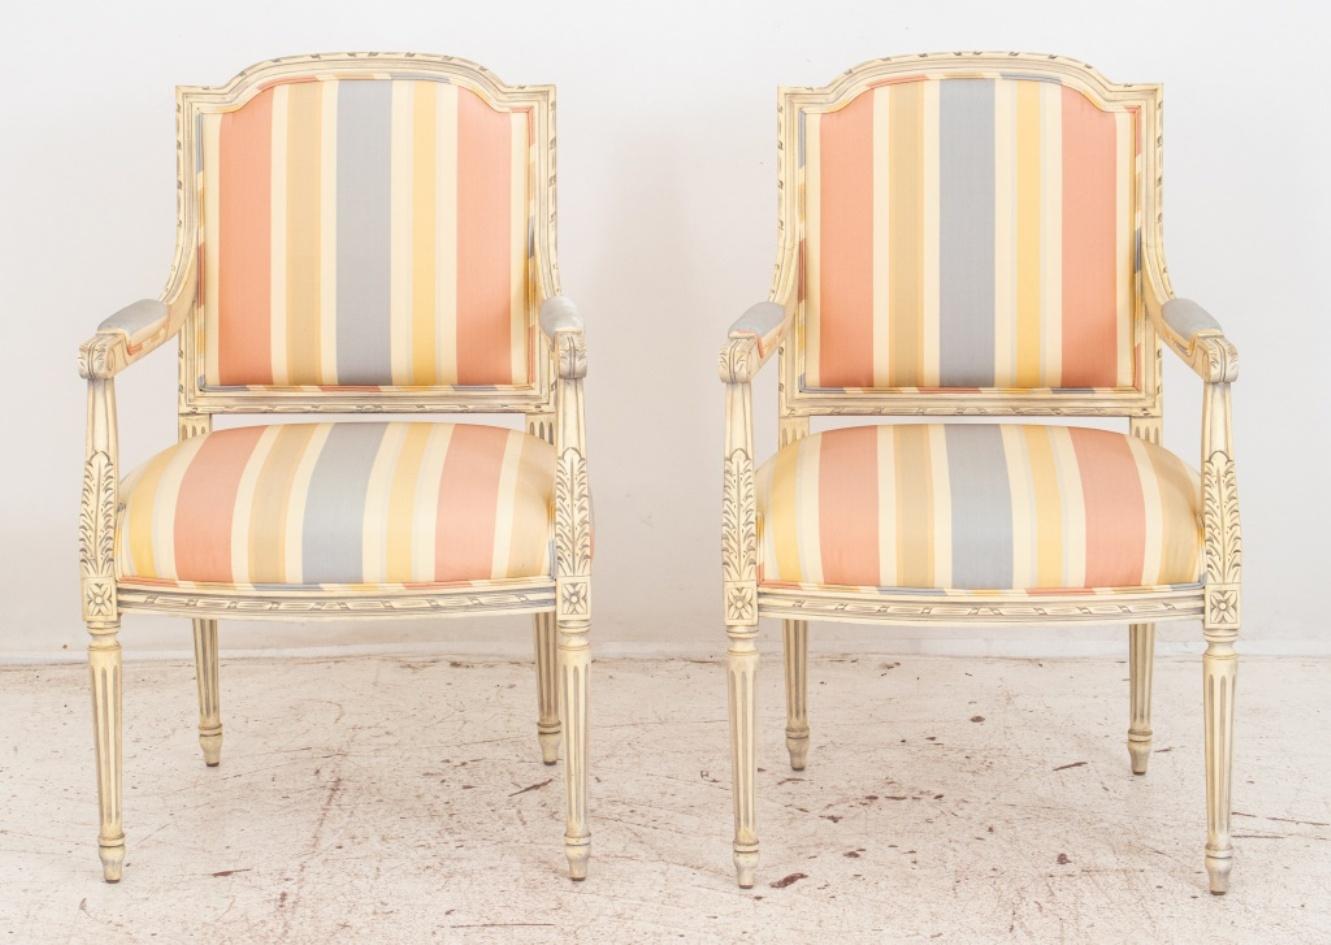 French Louis XVI style pair of painted white and lightly patinated arm chairs raised on turned tapered legs, upholstered with a light striped fabric.

Dimensions: 35.5